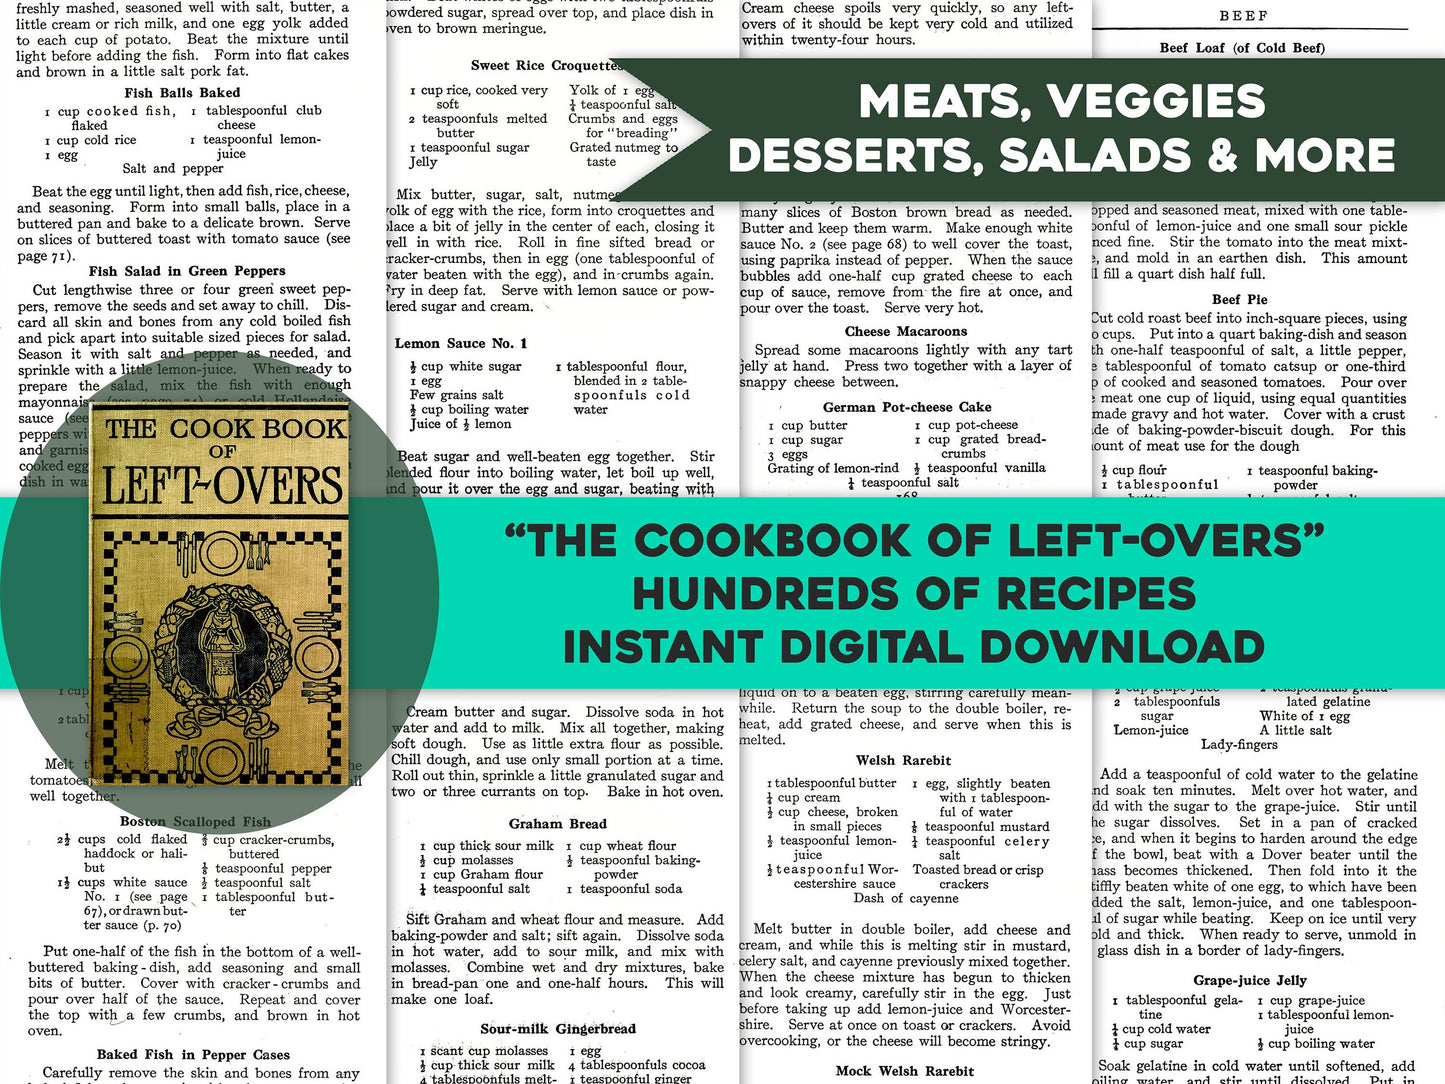 The Cookbook of Leftovers Hundreds of Recipes